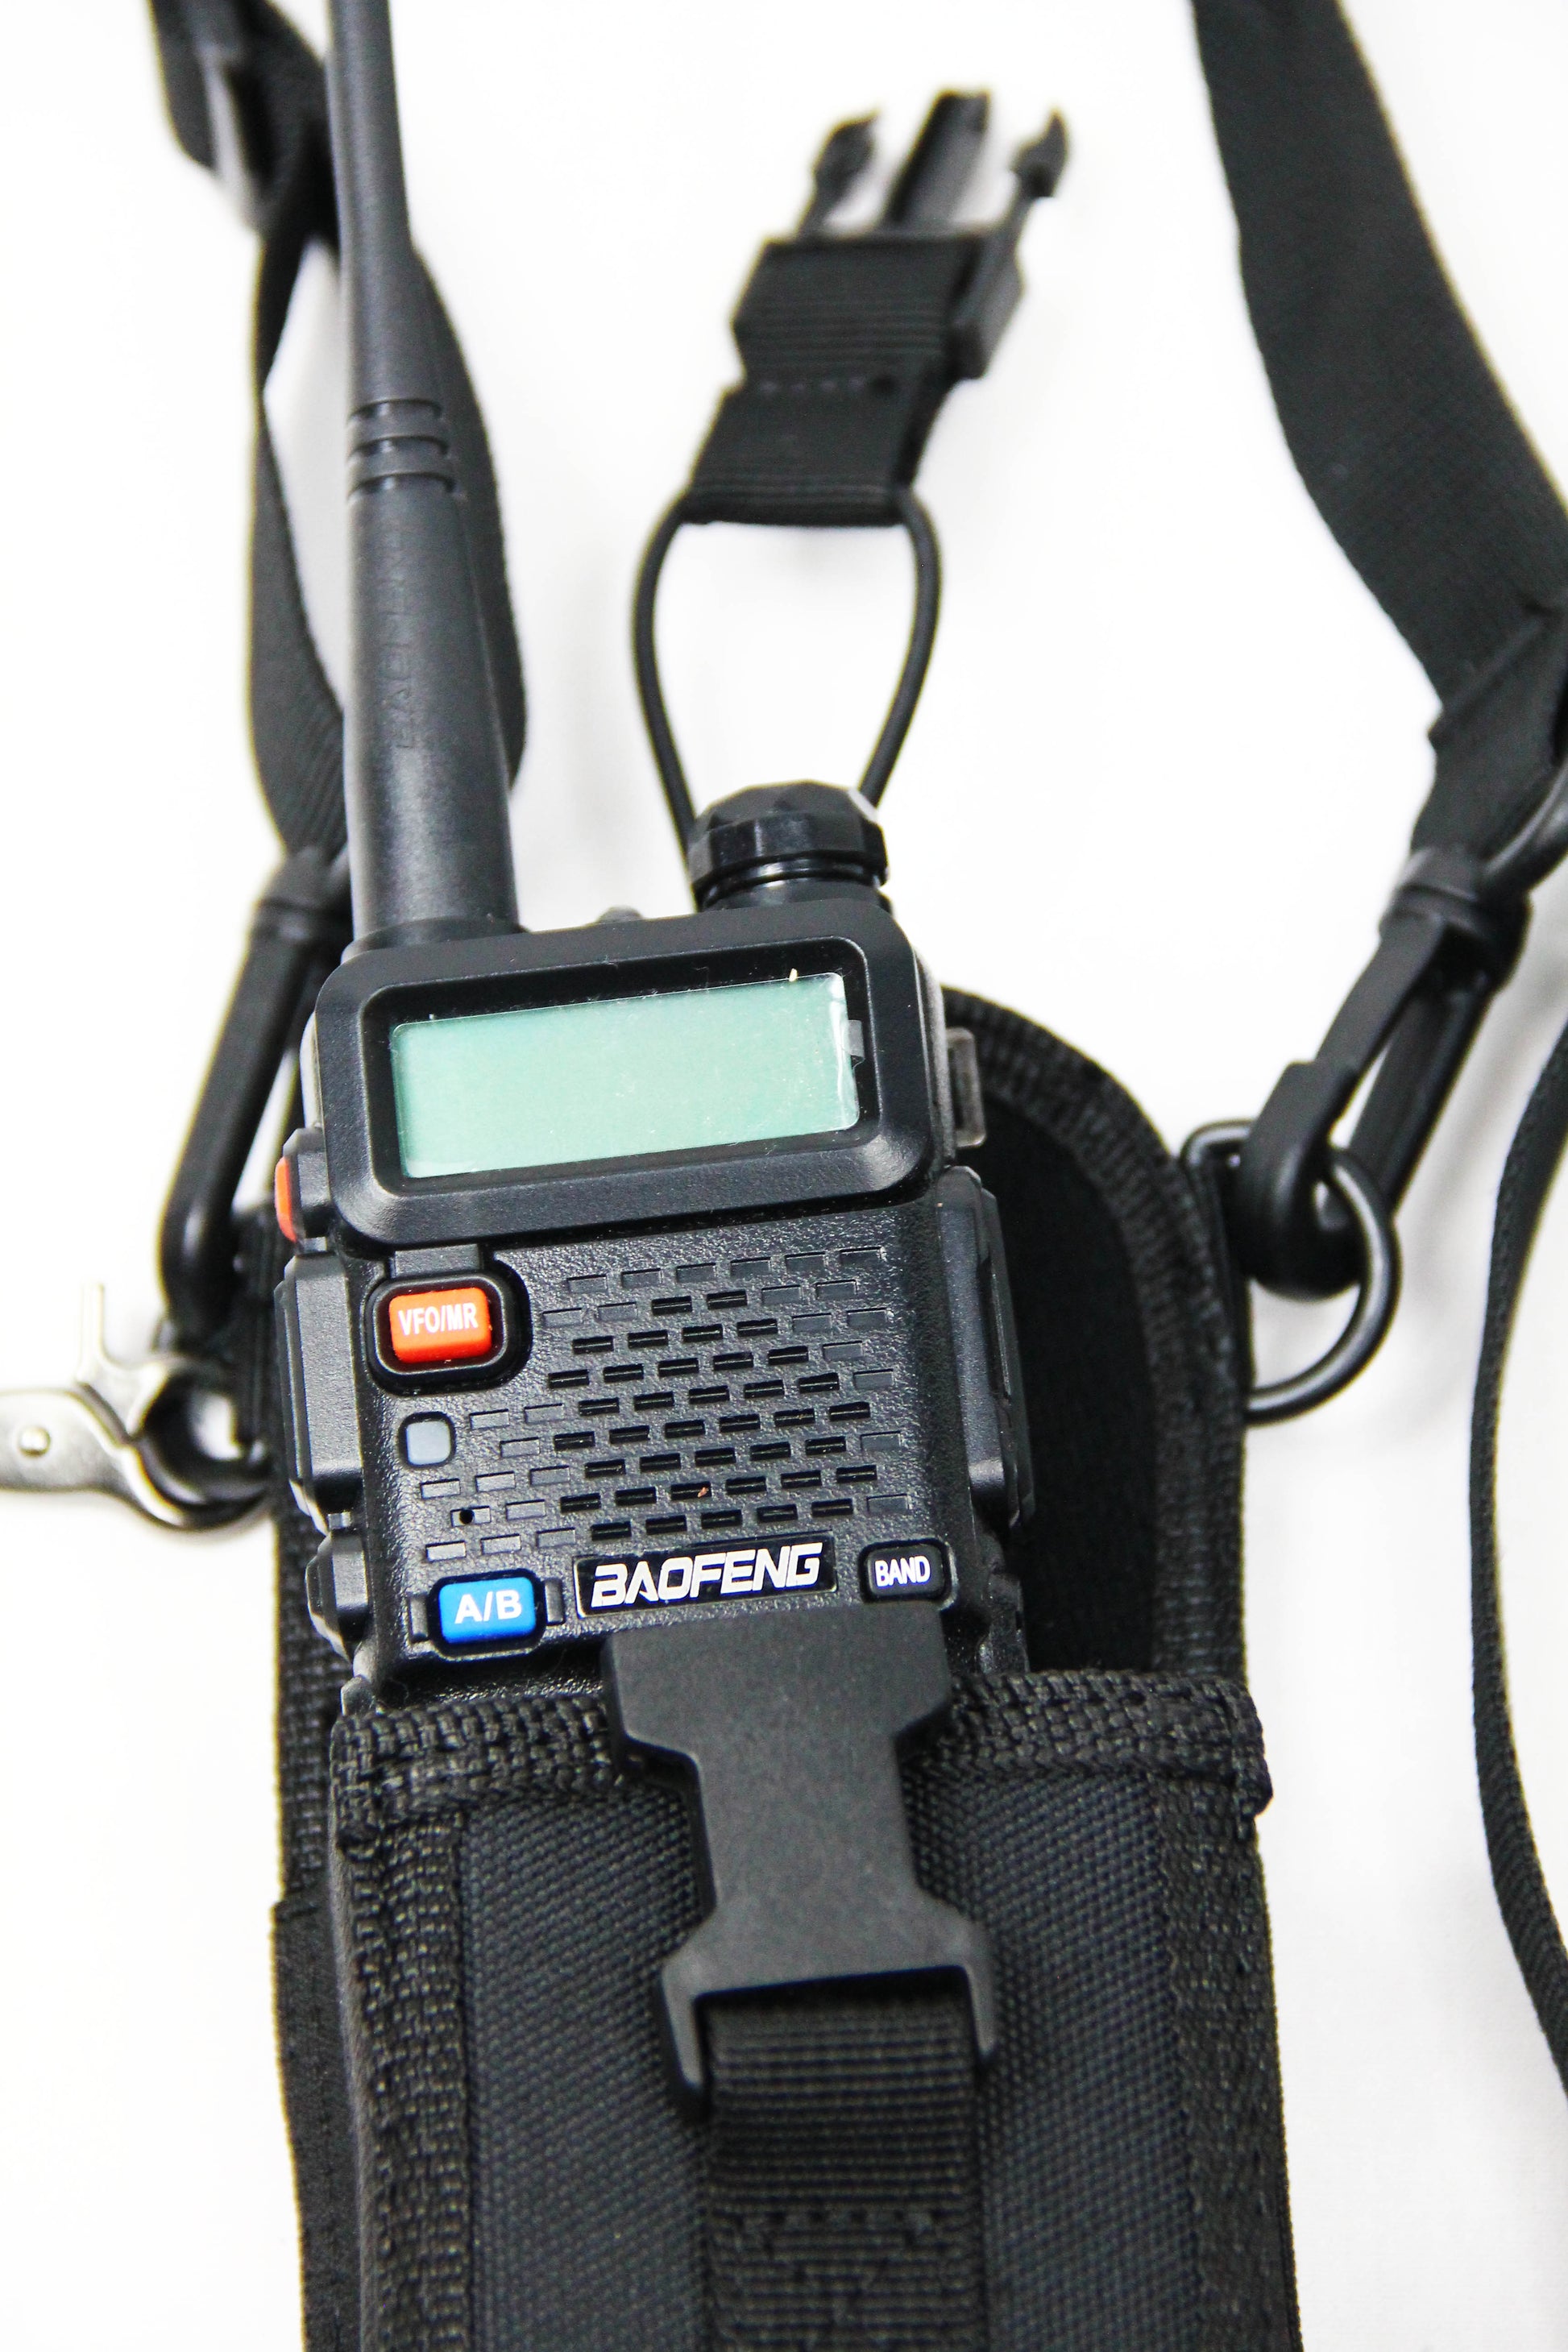 X-FIRE® Washable Duty Belt Radio Holder for Portable Tactical Two-Way –